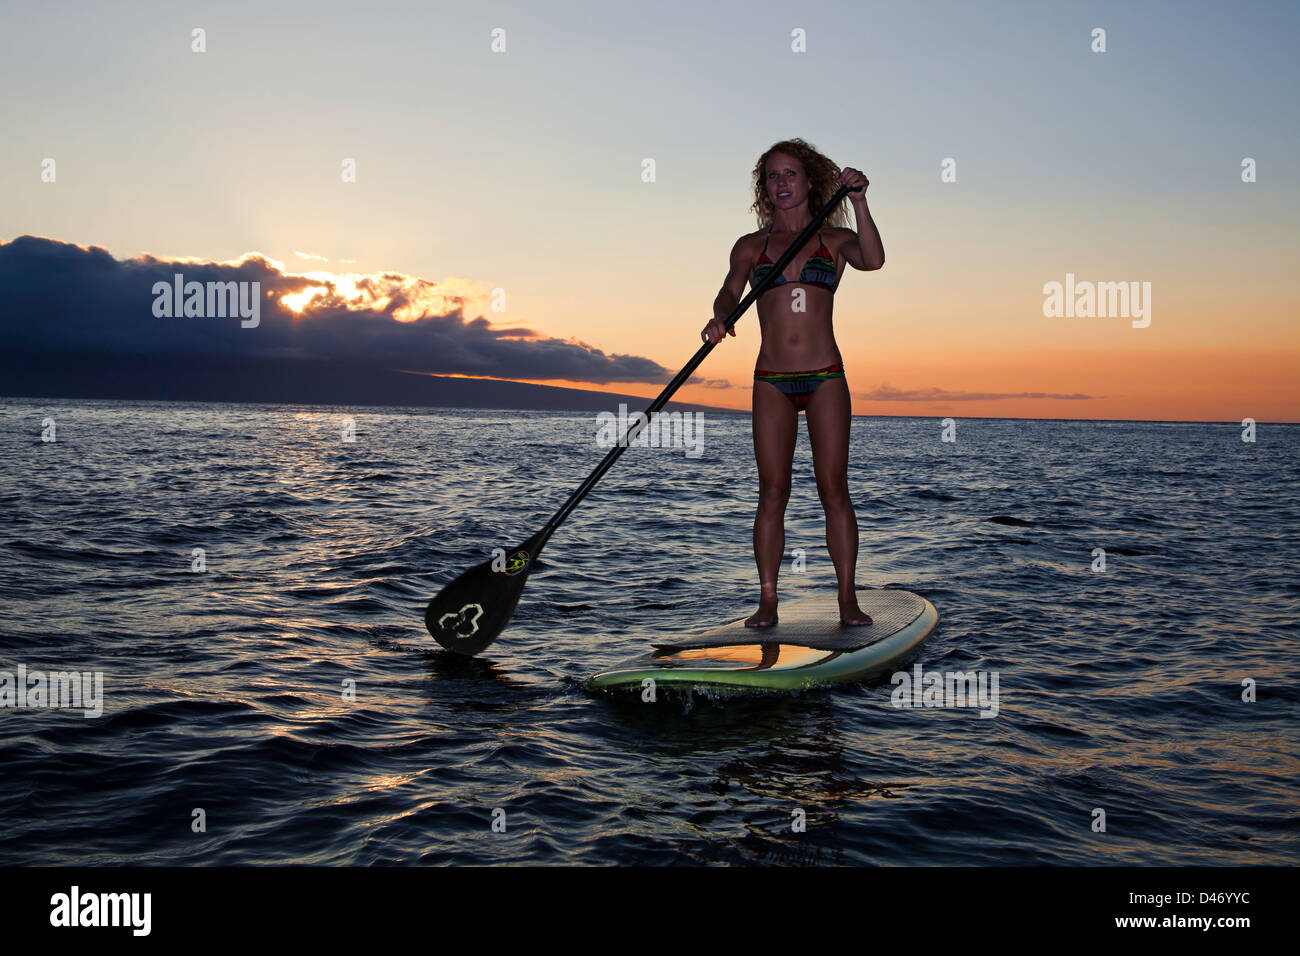 Surf Instructor Tara Angioletti At Sunset On A Stand-up Paddle Board 